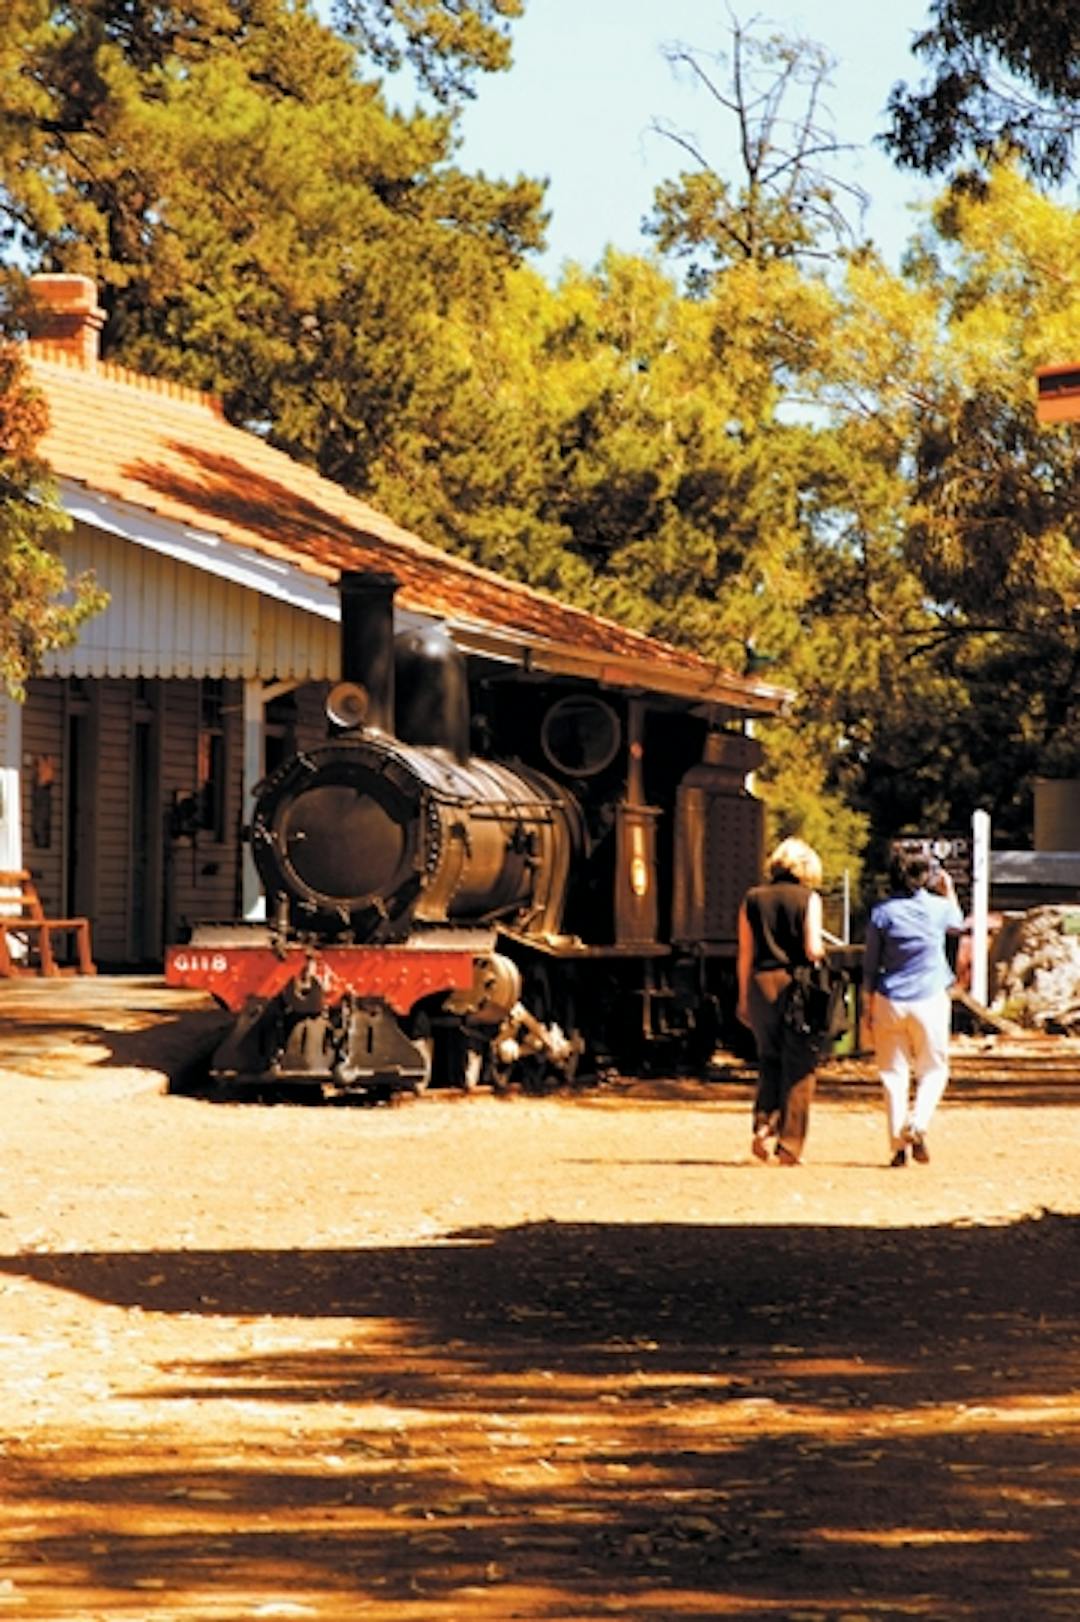 Kalamunda's Historic Village with steam train, gum trees and weatherboard buildings